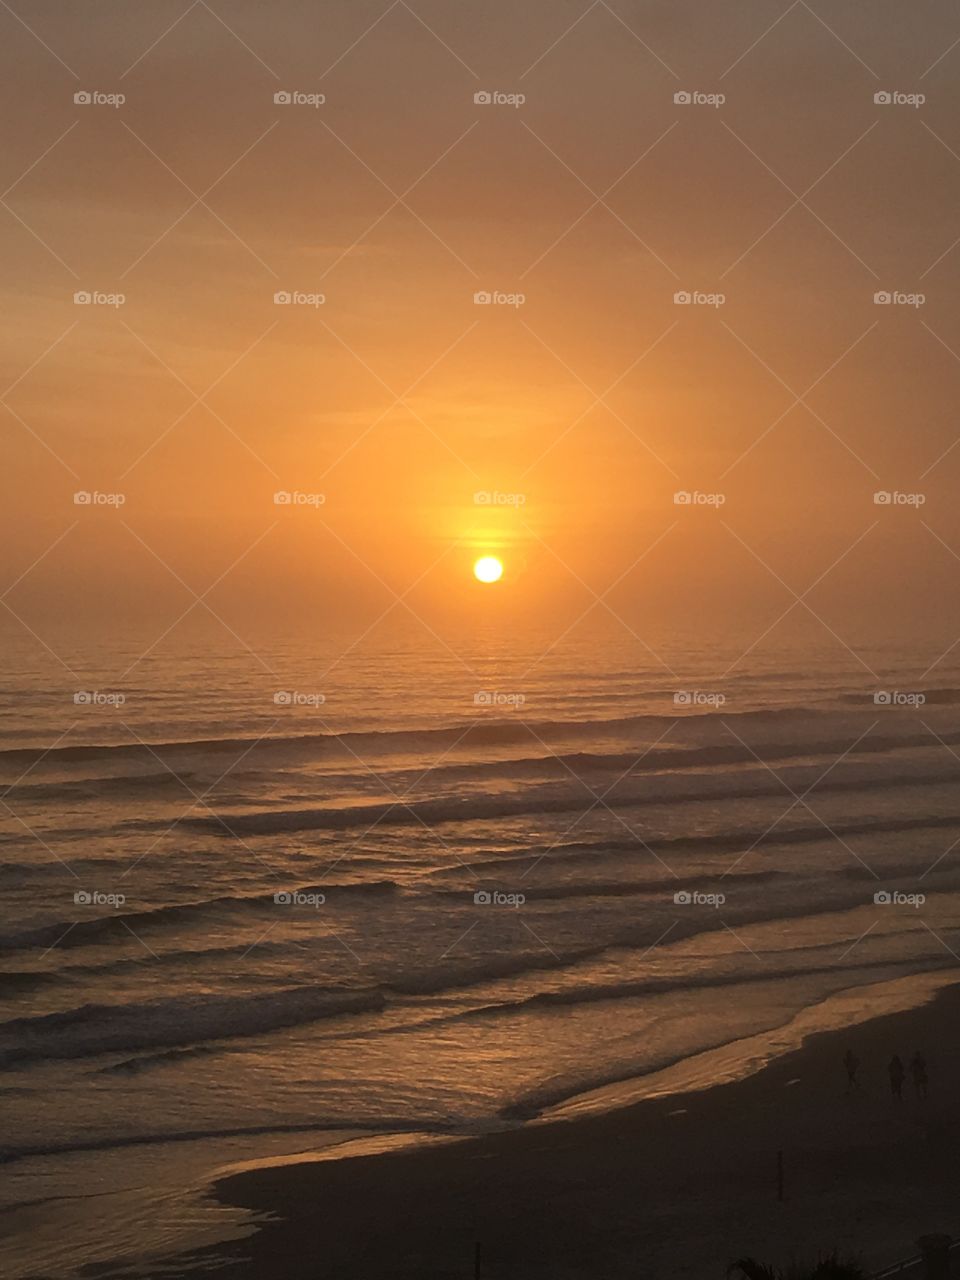 Perfectly round sun setting over the ocean